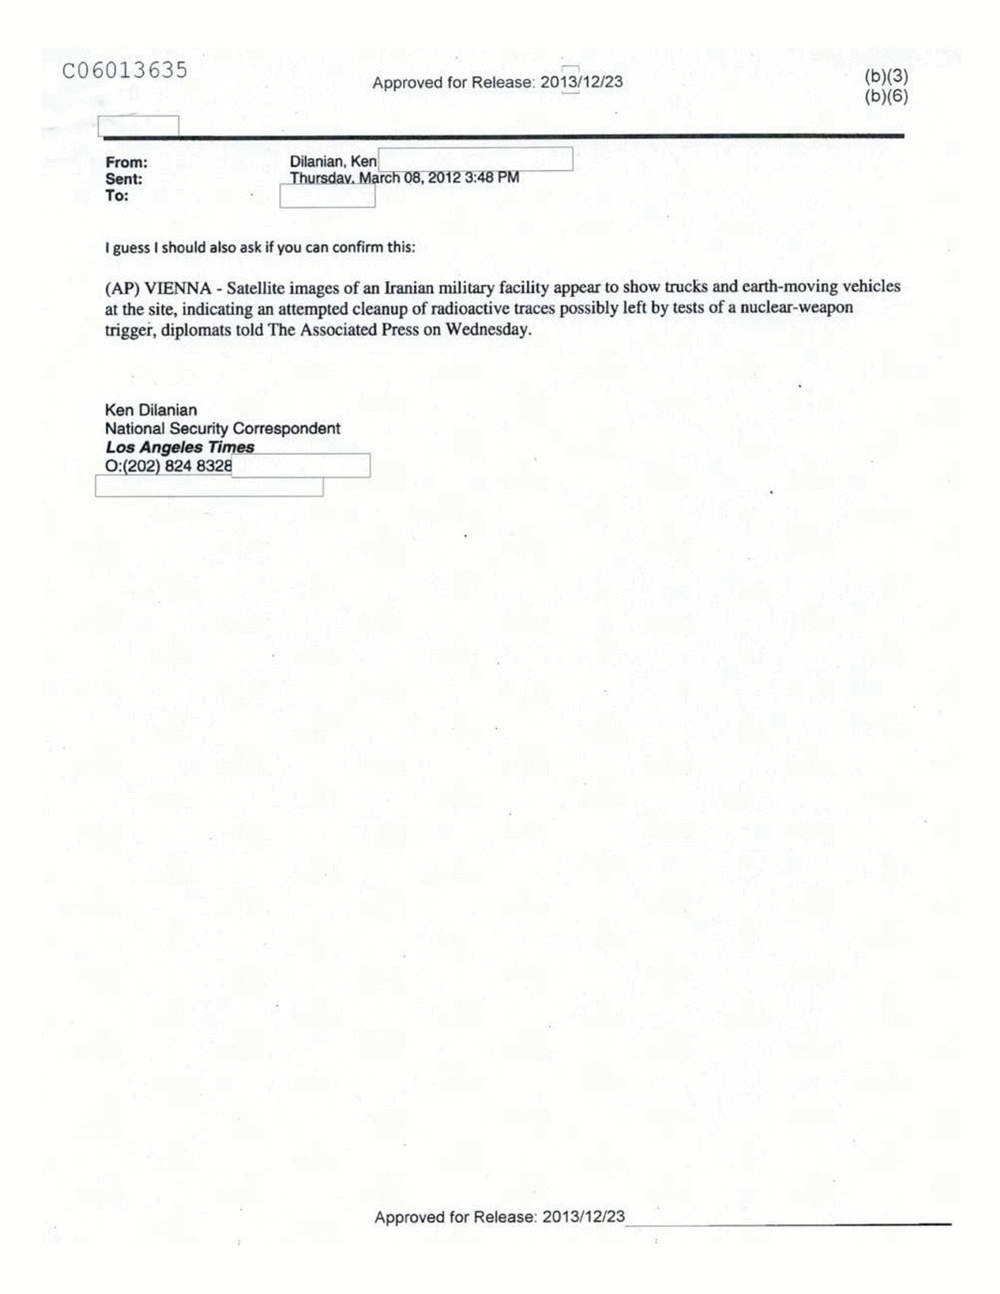 Page 473 from Email Correspondence Between Reporters and CIA Flacks